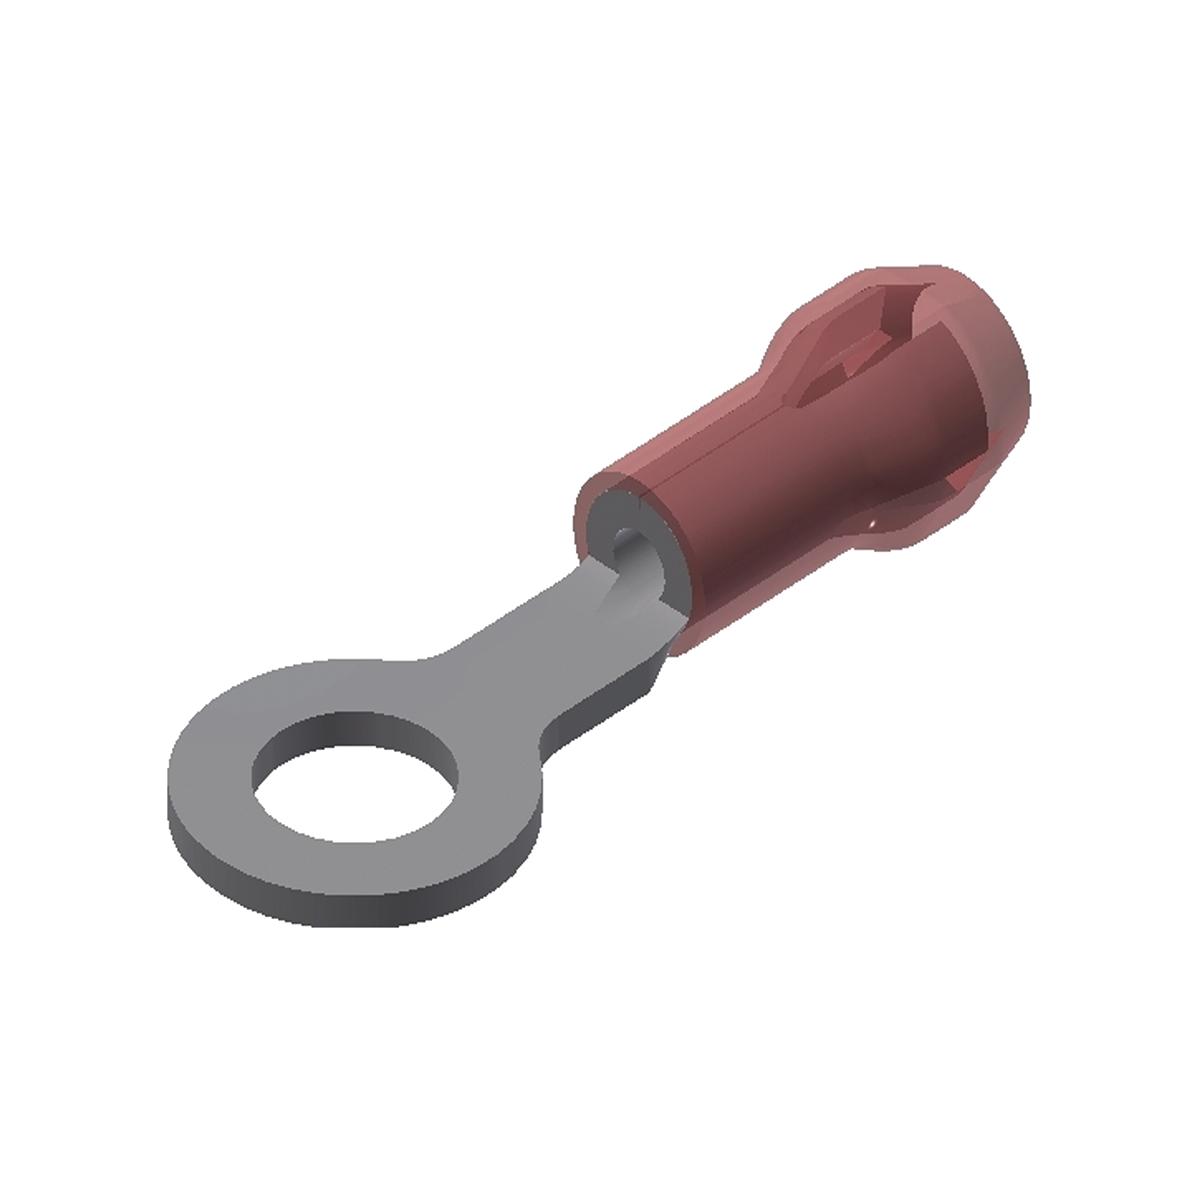 Hubbell YAE18N1 Nylon Ring Terminal For 22 - 18 AWG.  ; Features: INSULUG Type YAE-N Nylon Insulated Terminals Are Designed With A Multi finger Insulation Grip For Paper, EPR And Other Elastic Or Hard To Grip Insulations, The Metal Fingers Firmly Grip The Insulation Prov